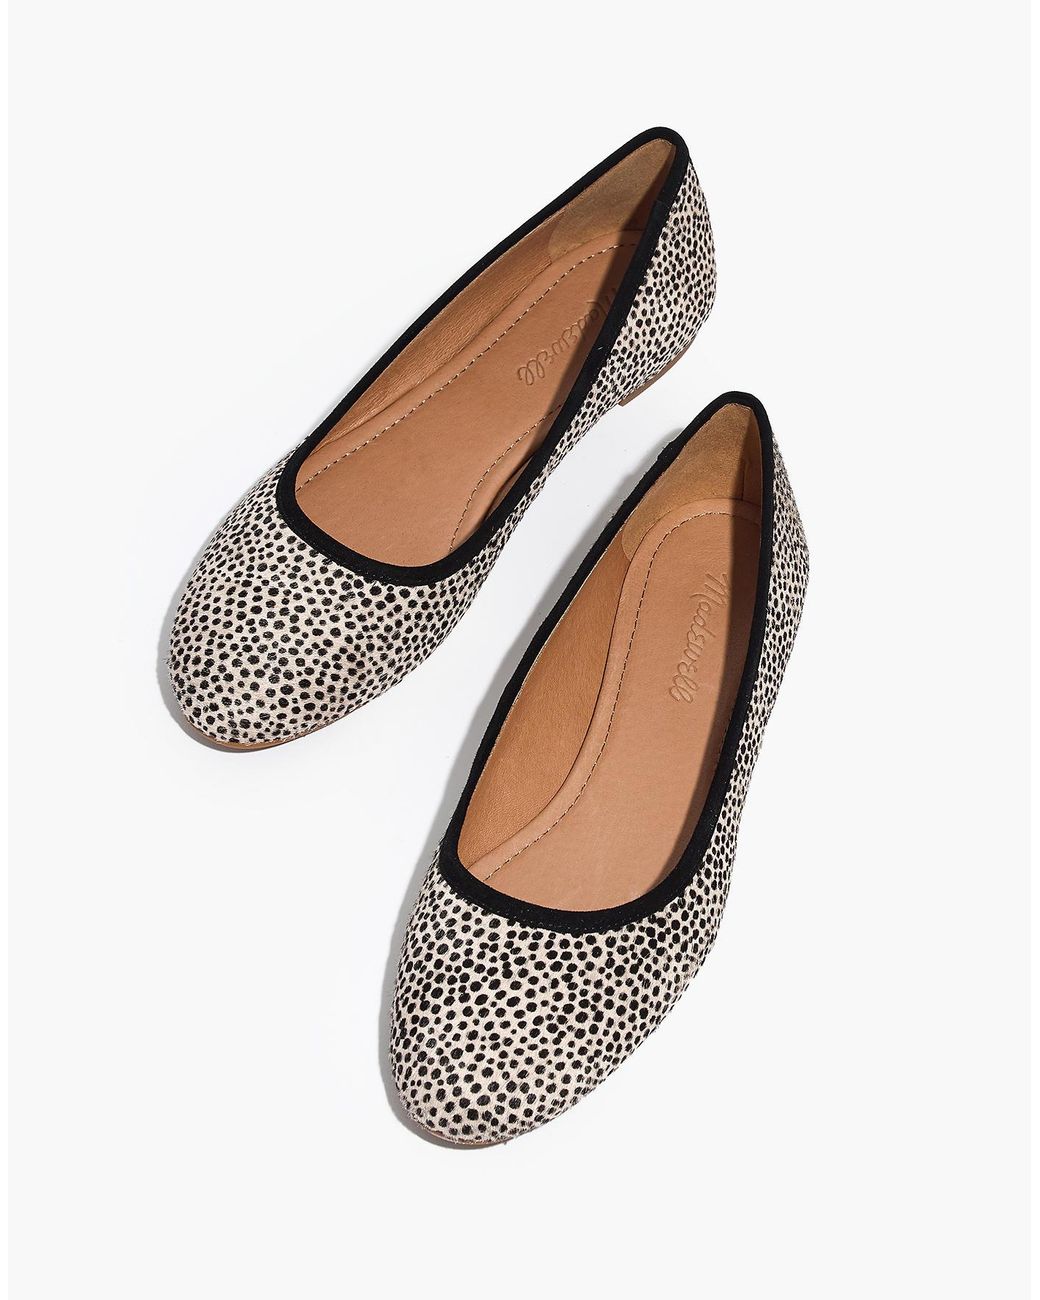 Madewell The Reid Ballet Flat In Spotted Calf Hair - Lyst